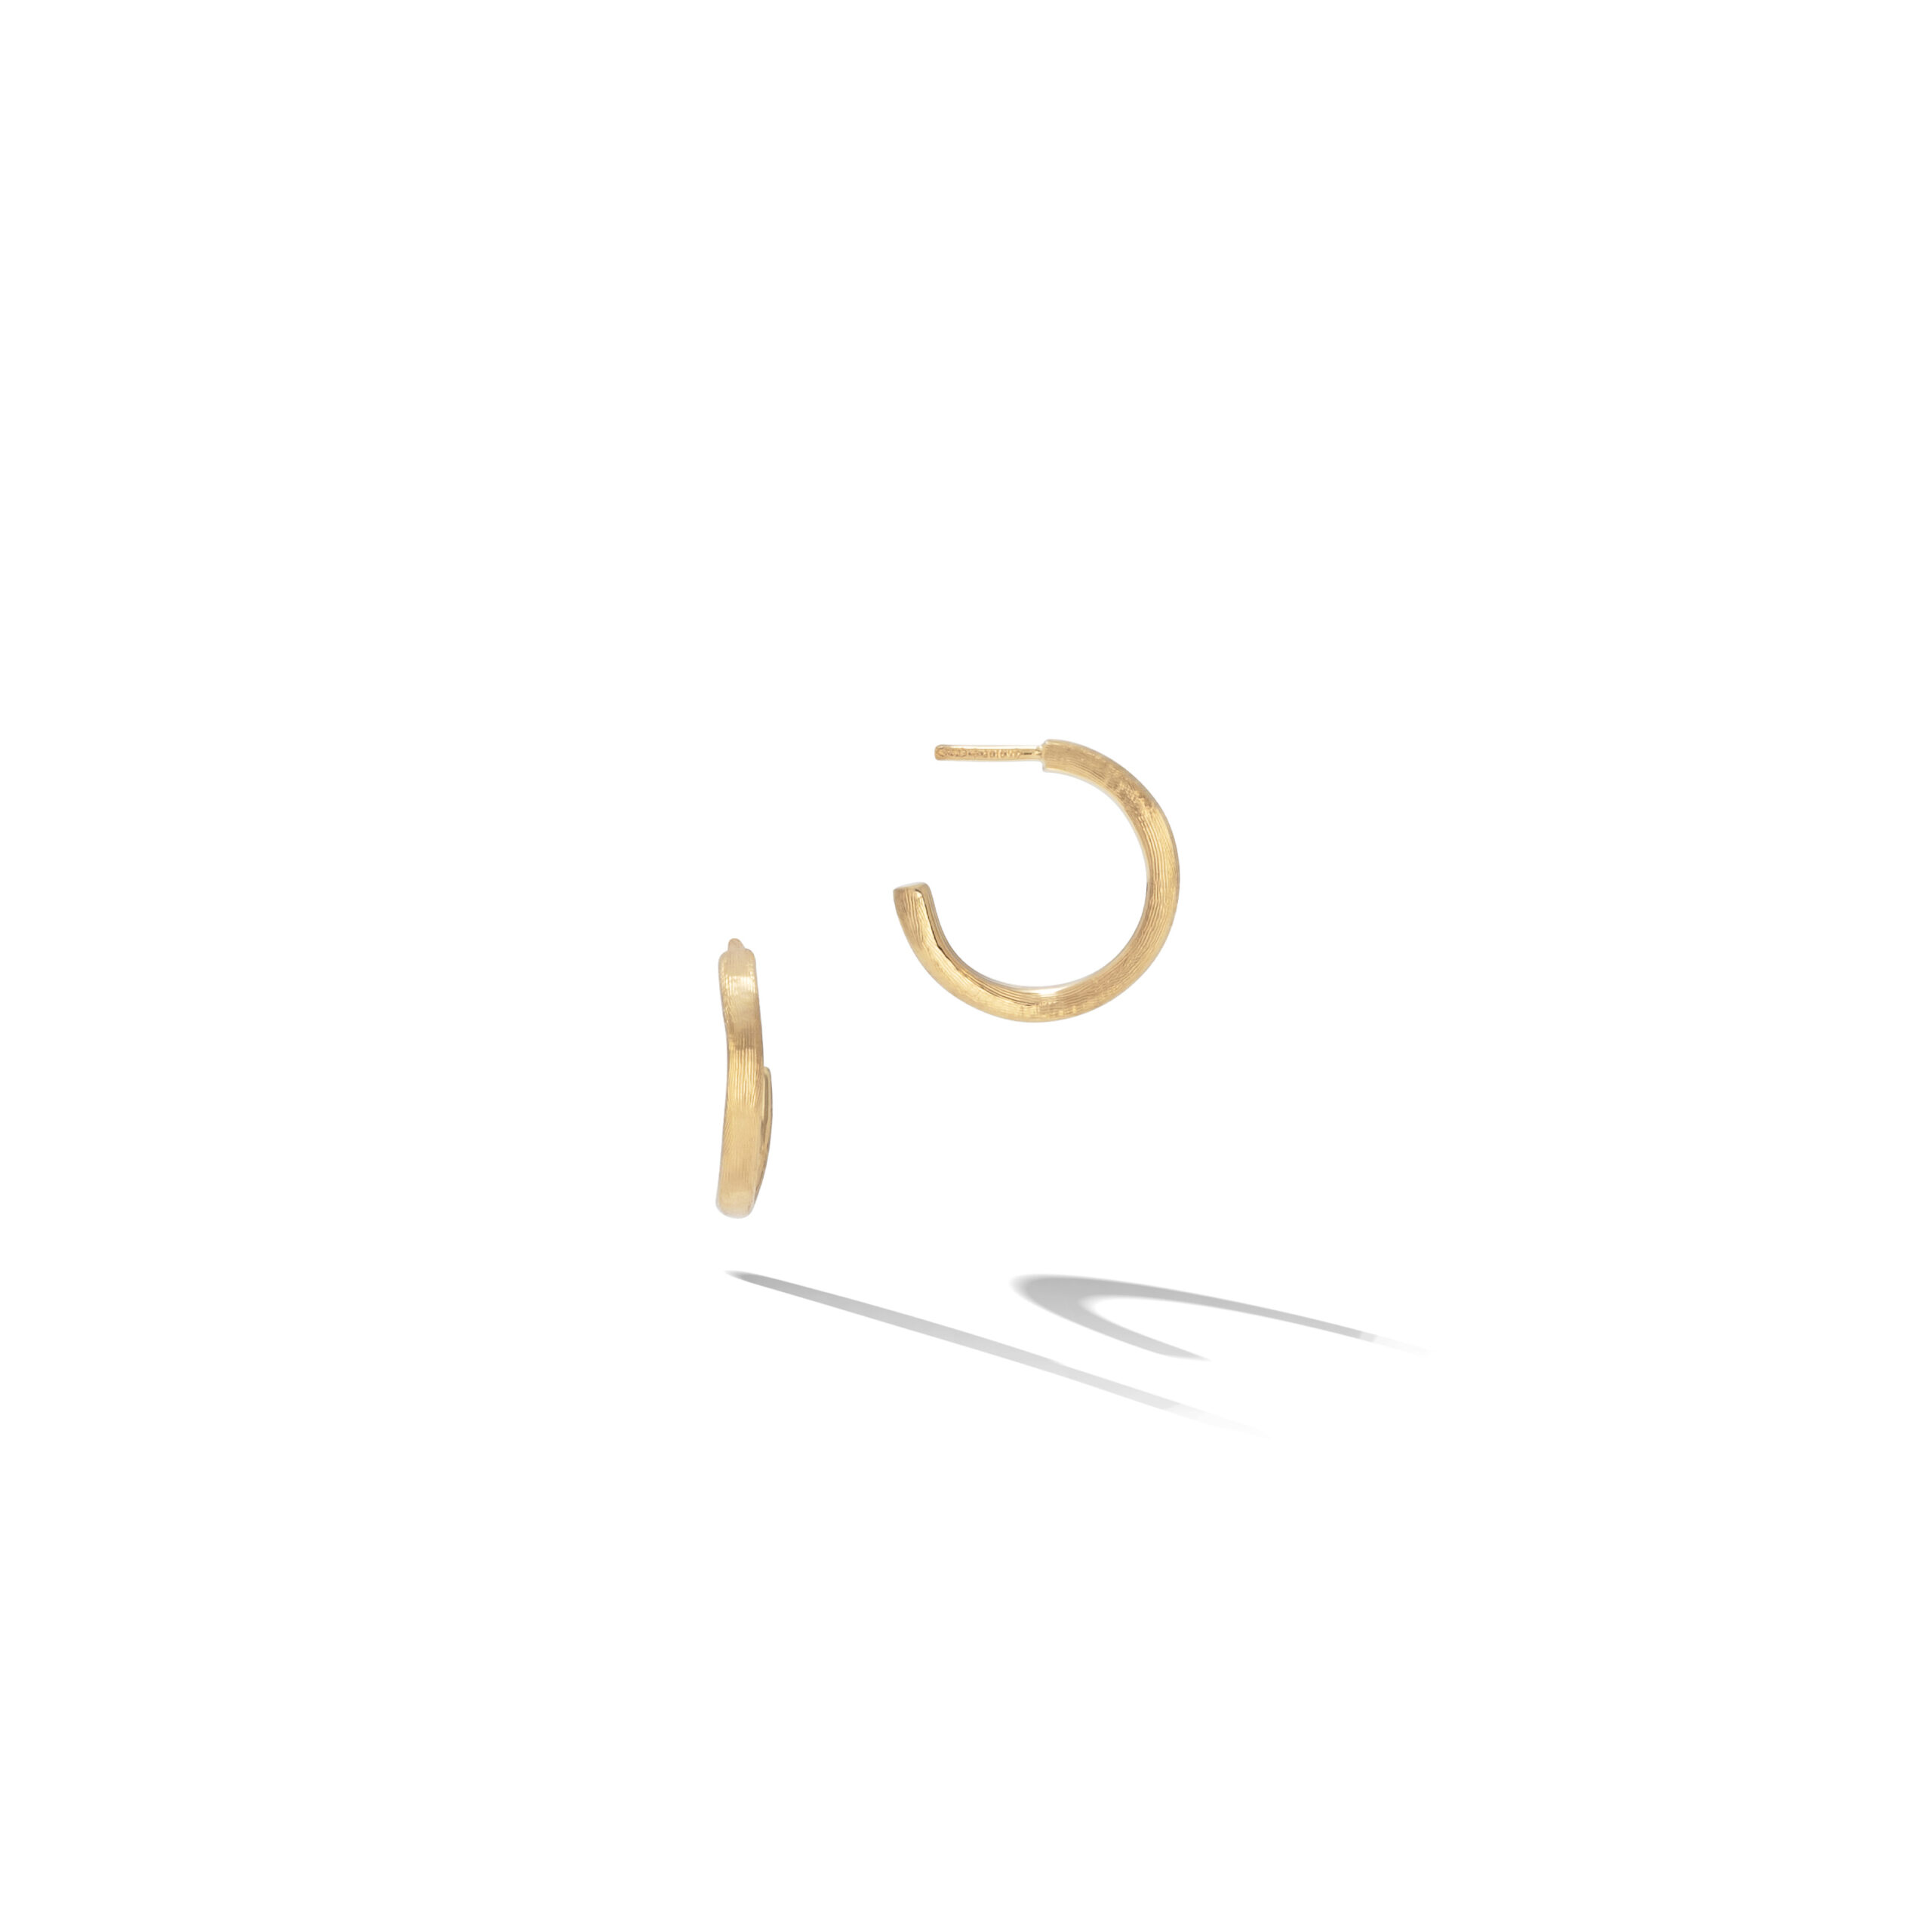 OB1362 Y LIMarco Bicego Jaipur Collection 18k Yellow Gold Small Hoop Earrings